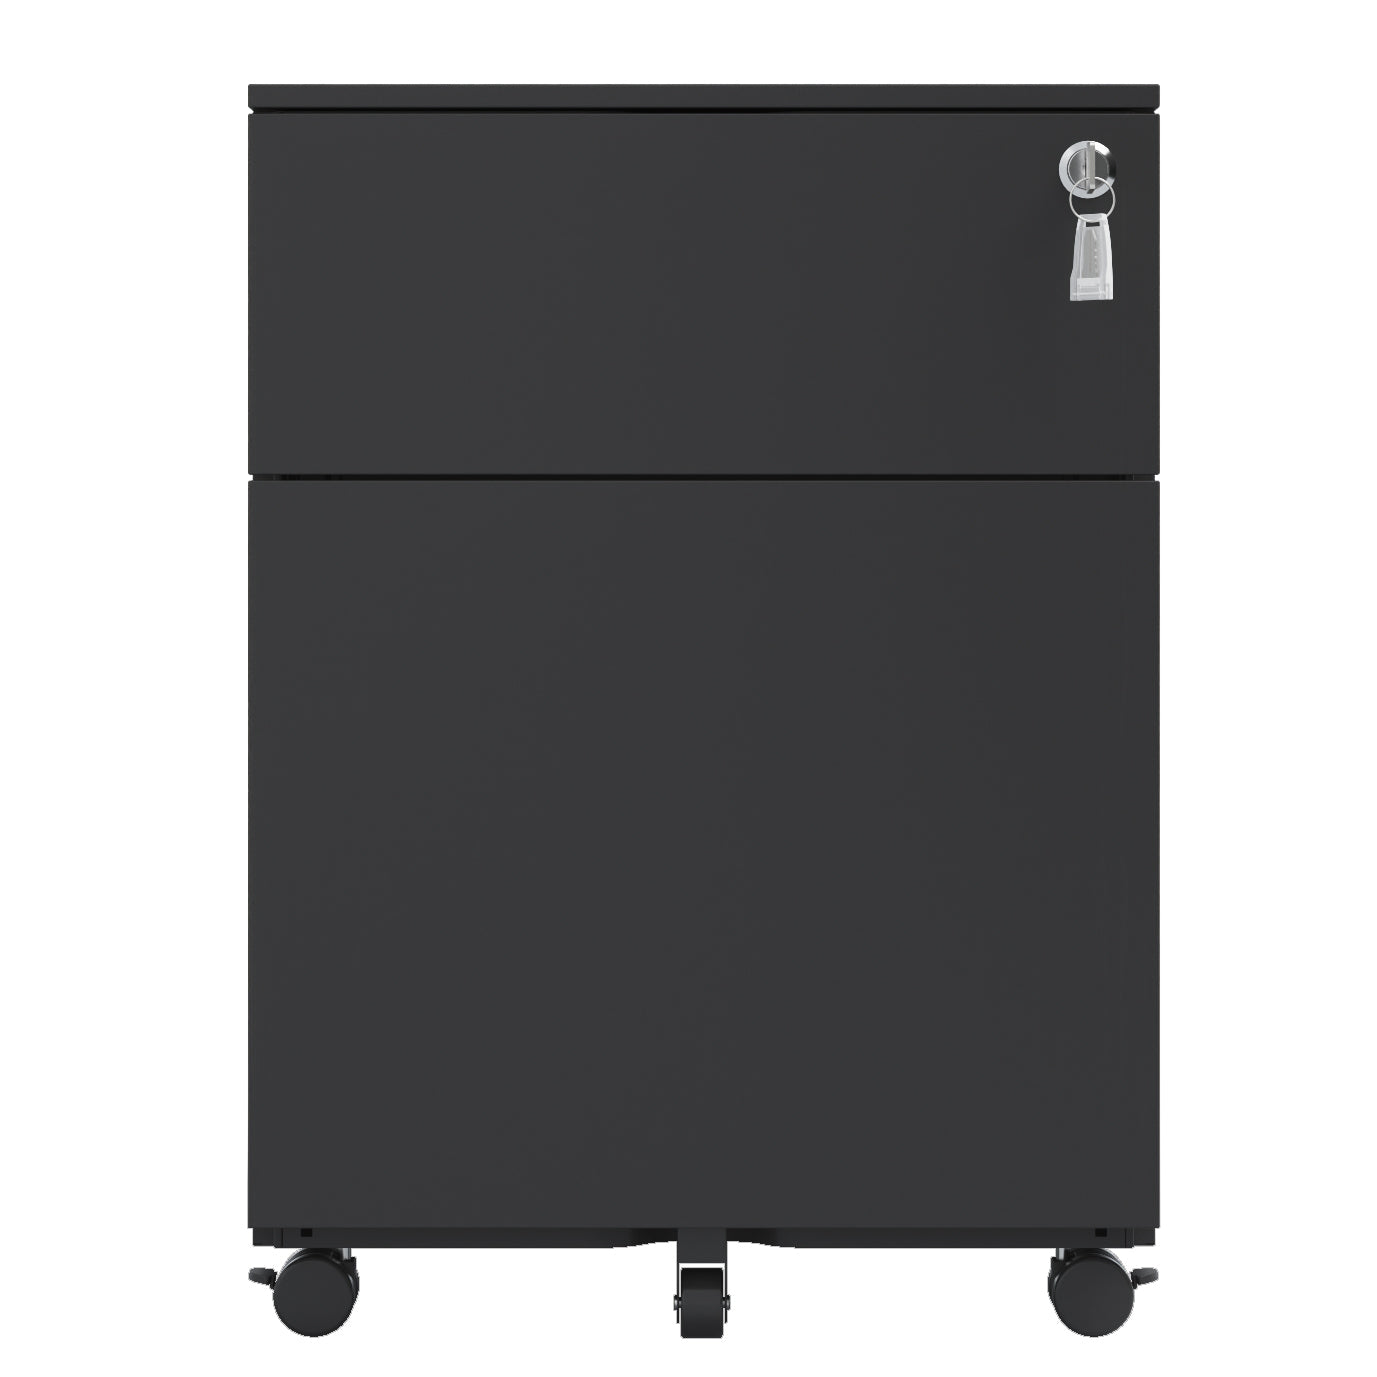 2 Drawer Mobile File Cabinet with Lock Steel File mobile file cabinets-1-2 drawers-powder